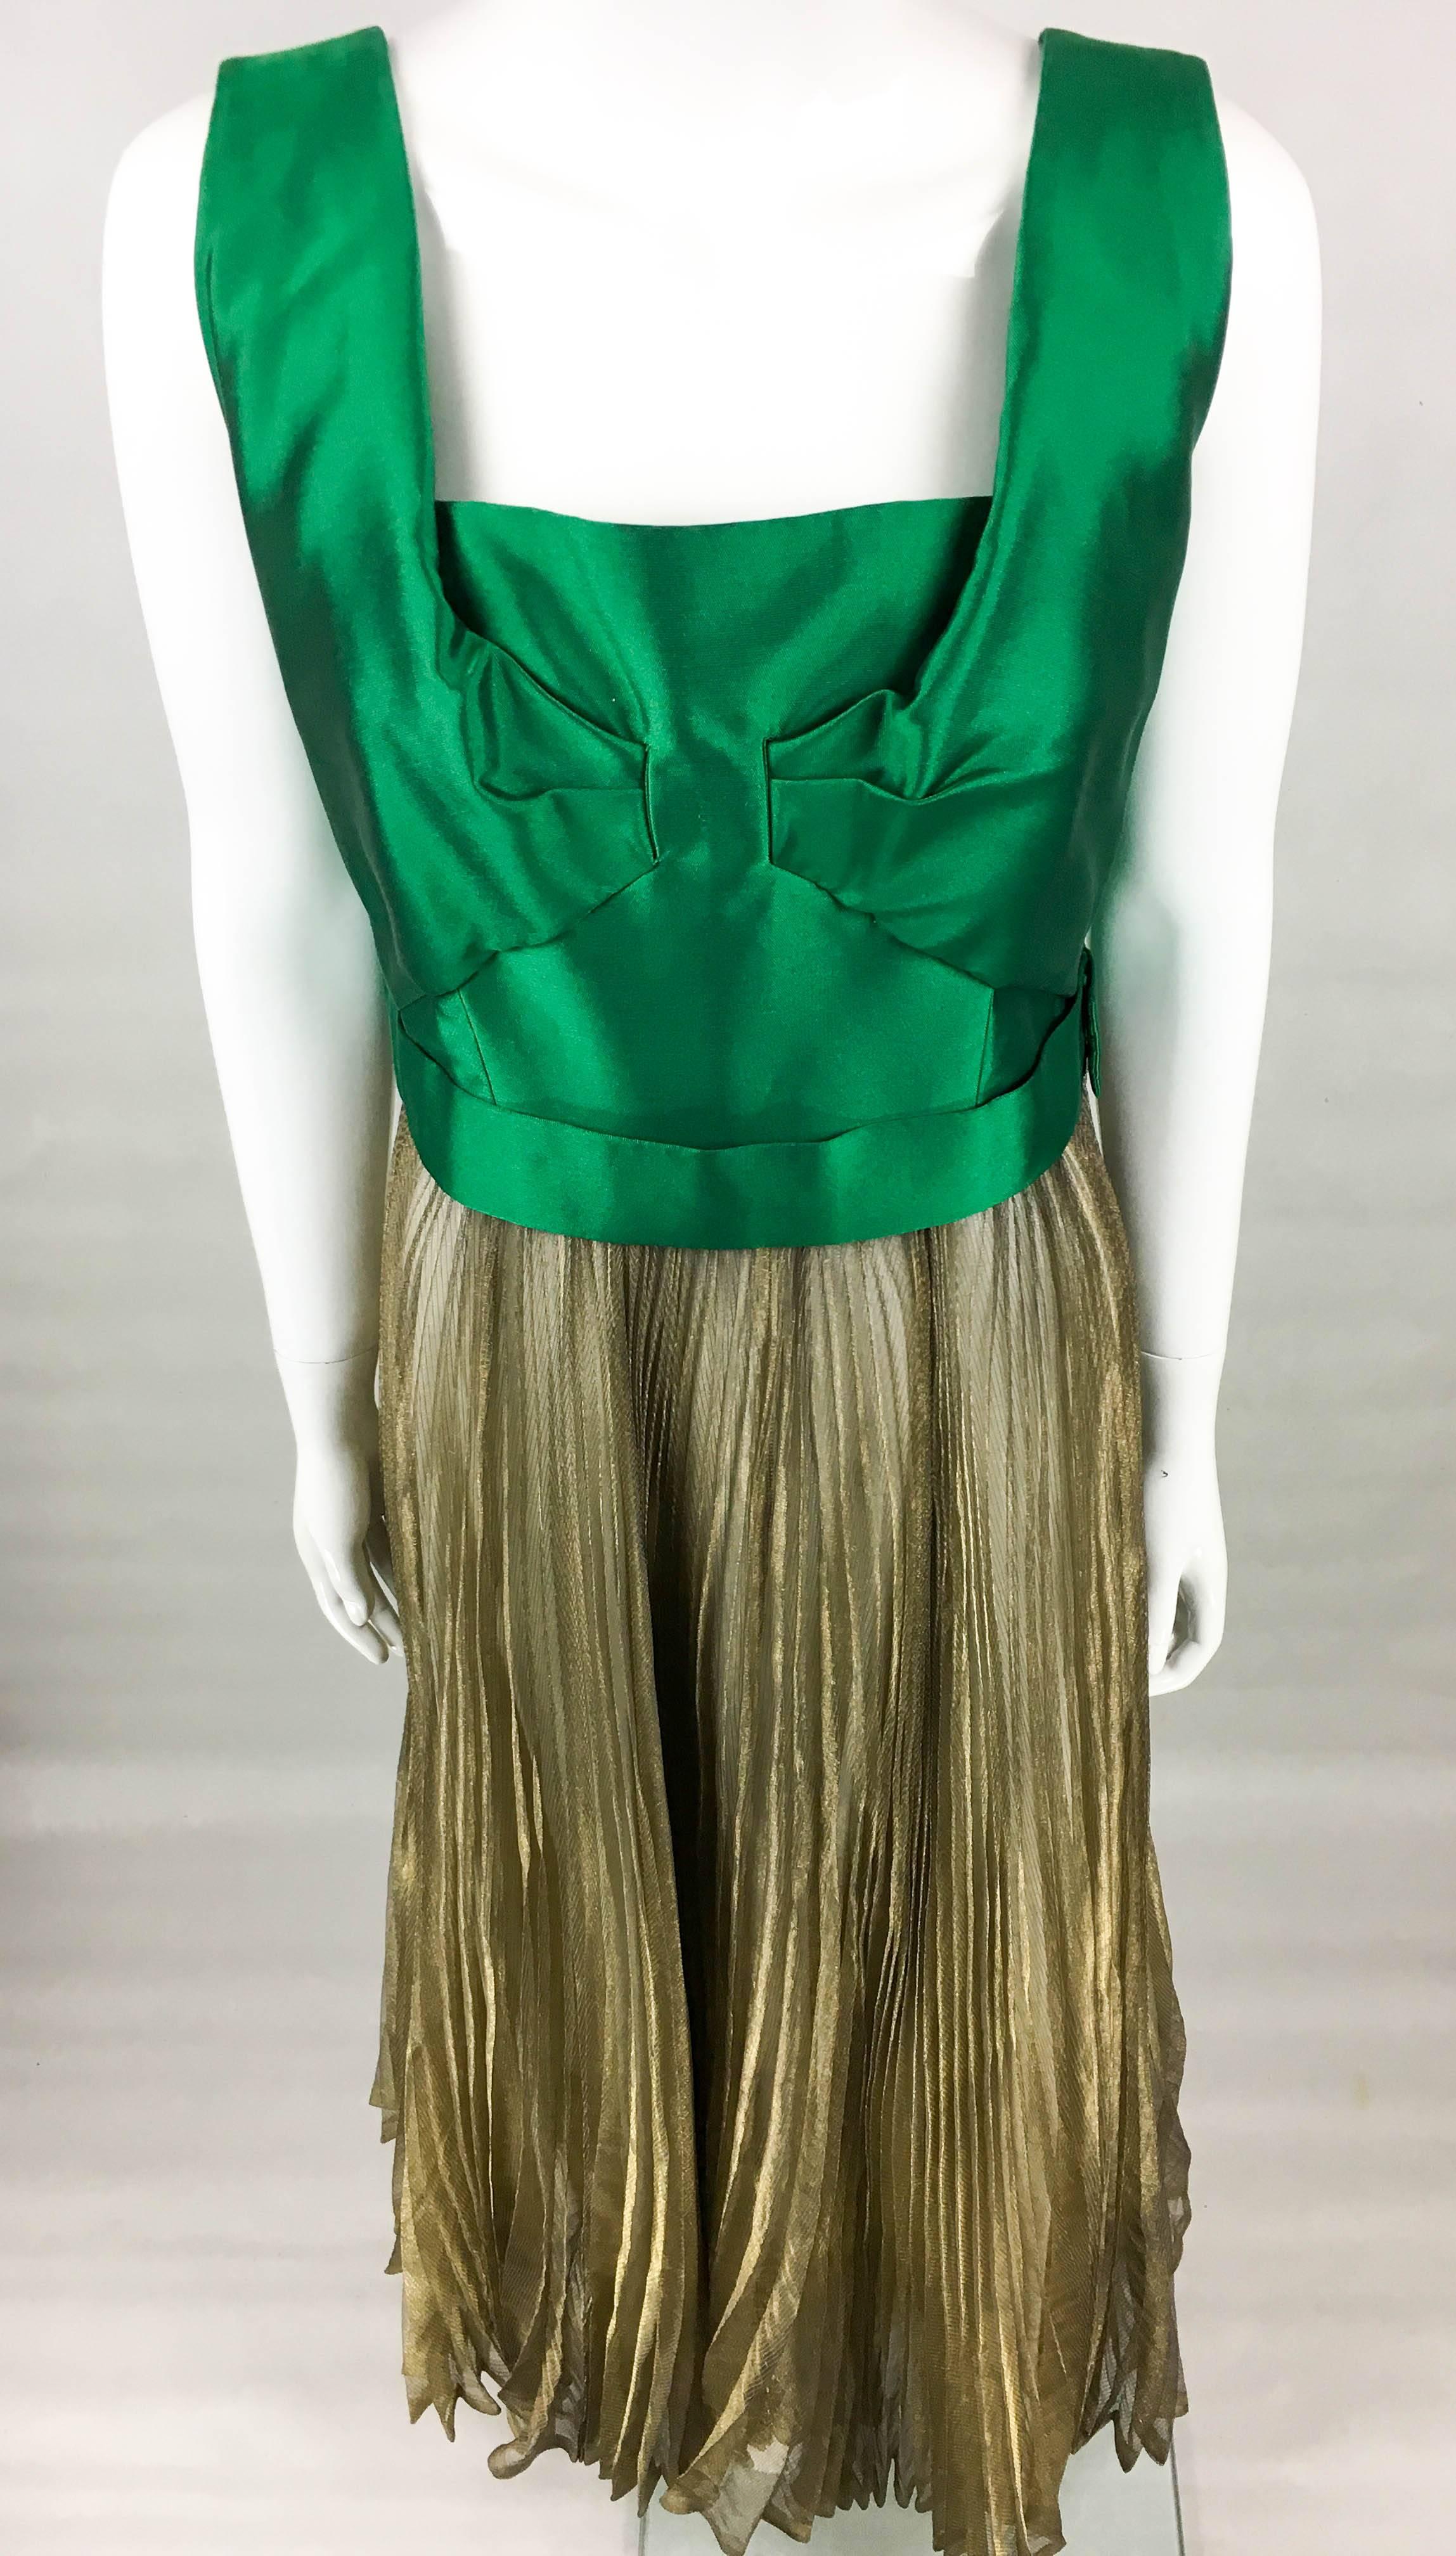 Lanvin Haute Couture Green Gazar and Gold Lame Pleated Gown, early 1960s In Excellent Condition For Sale In London, Chelsea